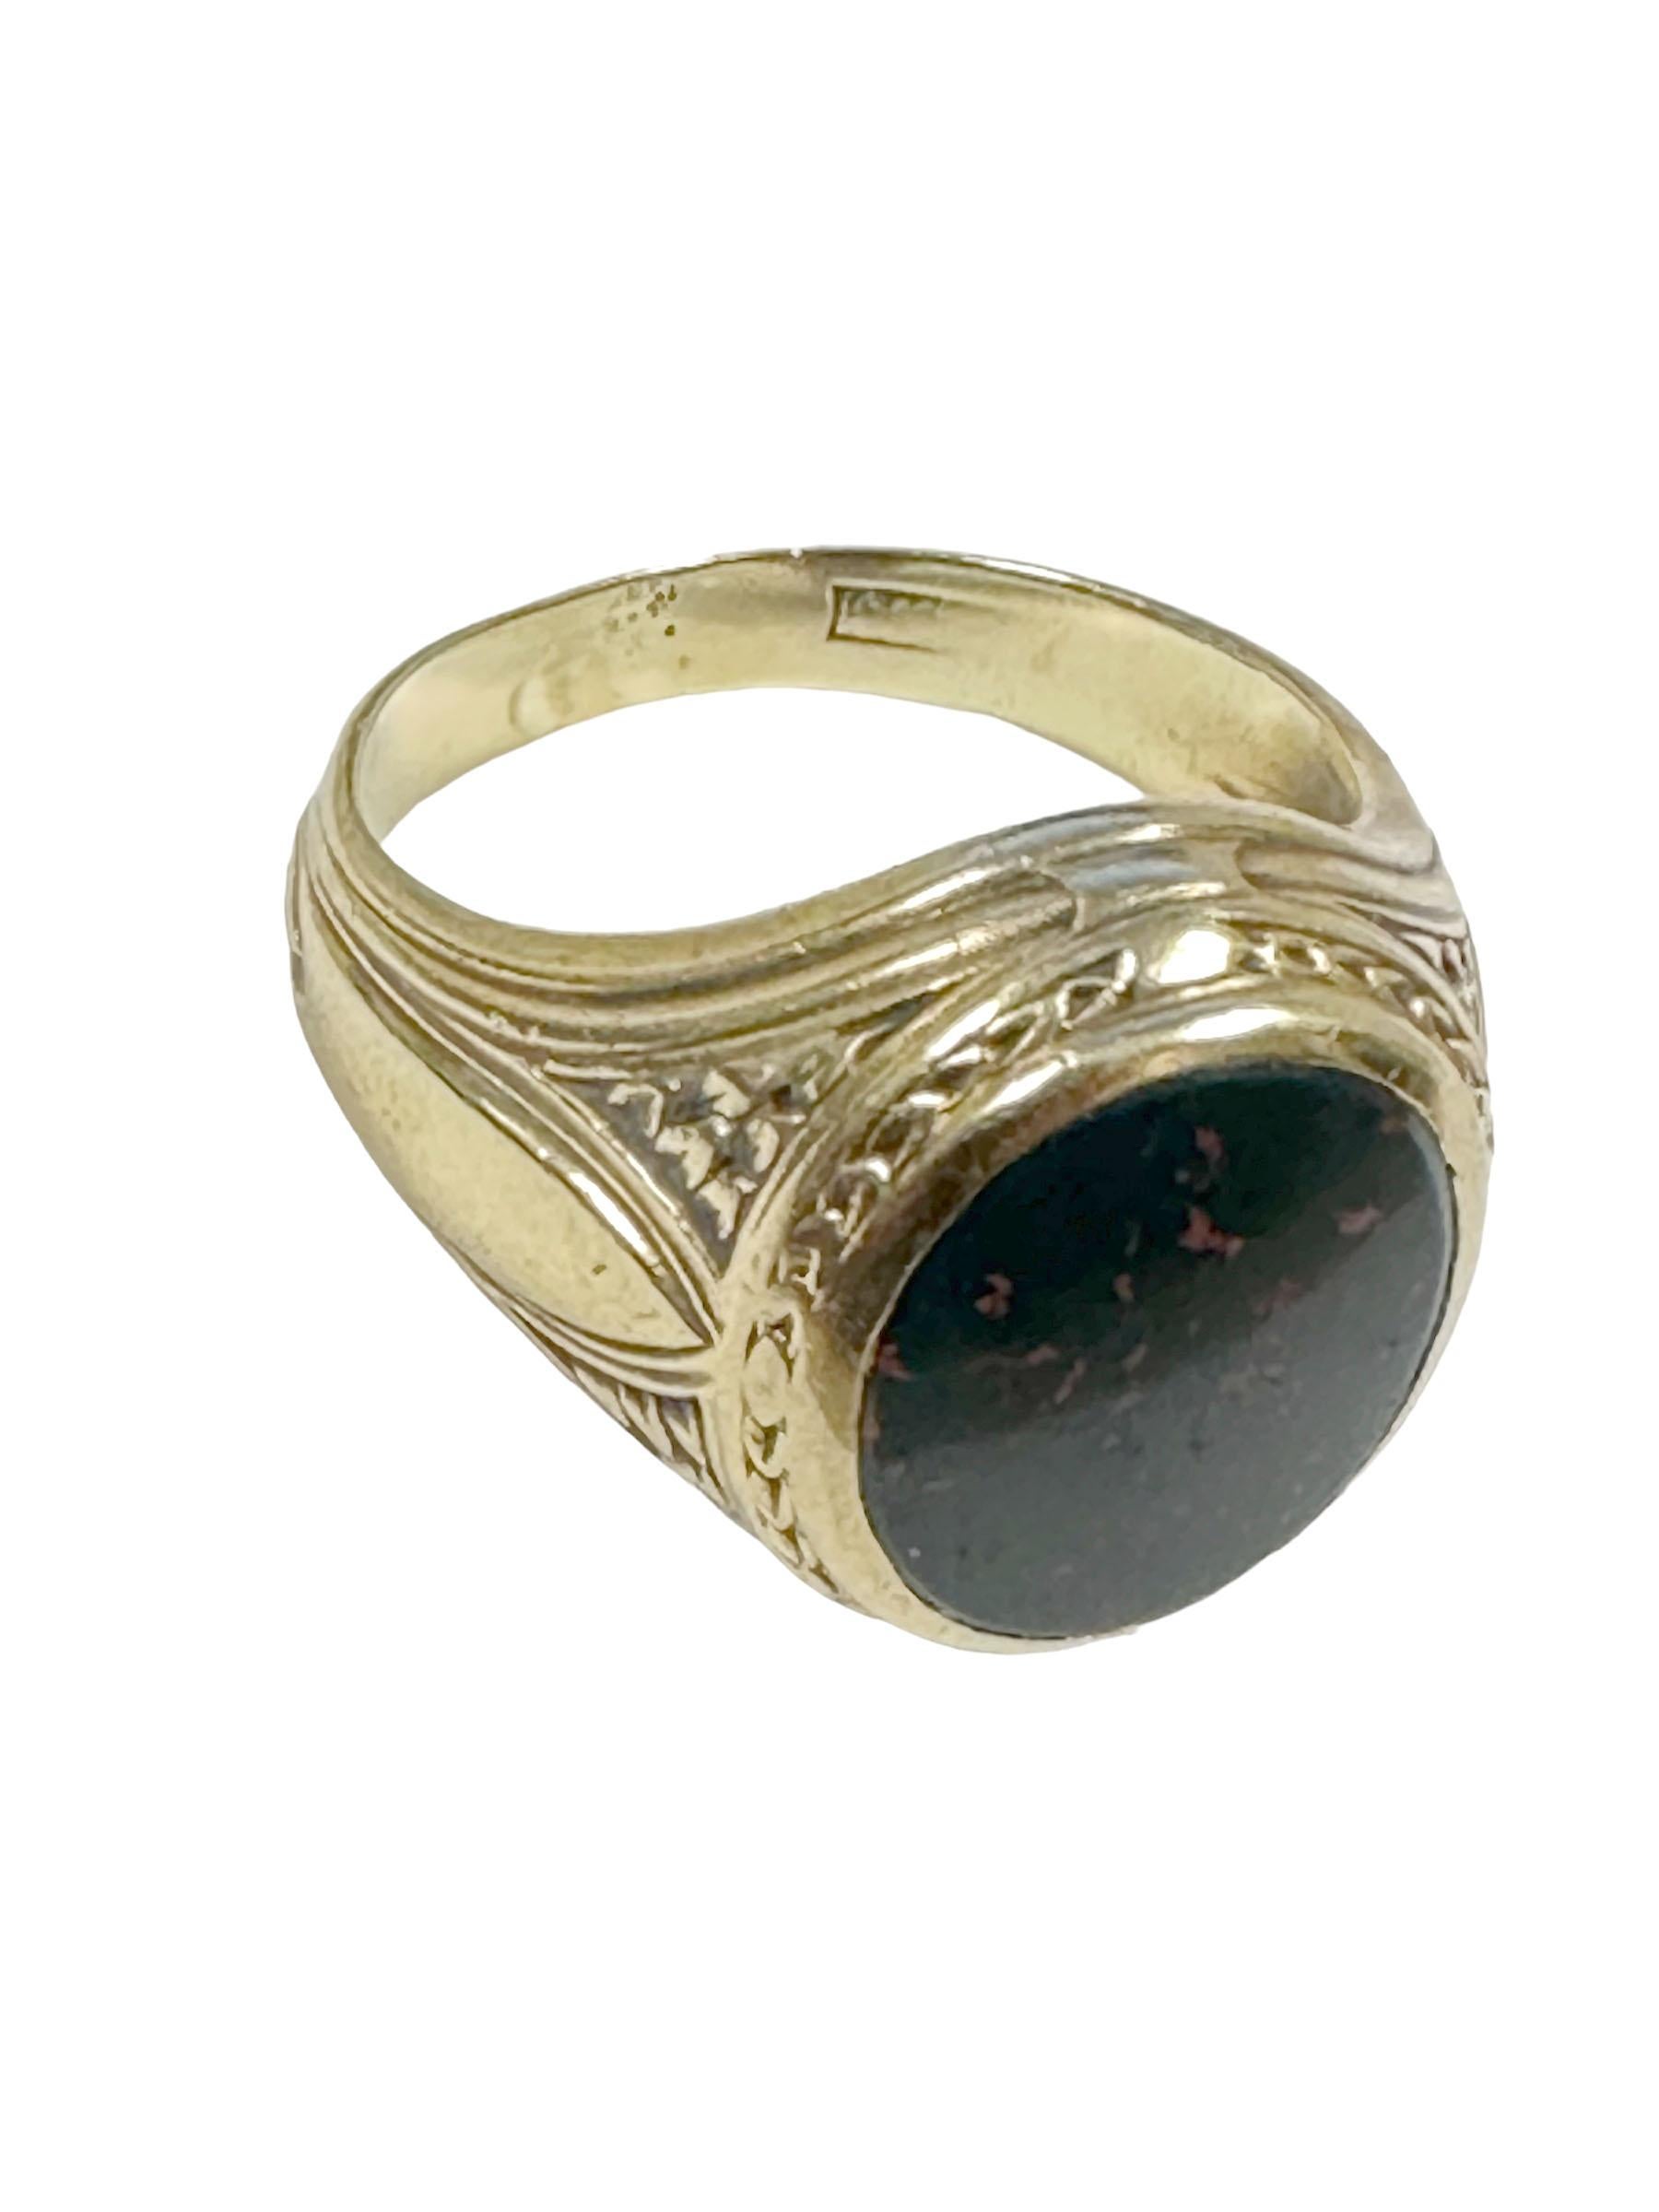 Men's Antique Gold and Blood stone Signet Ring